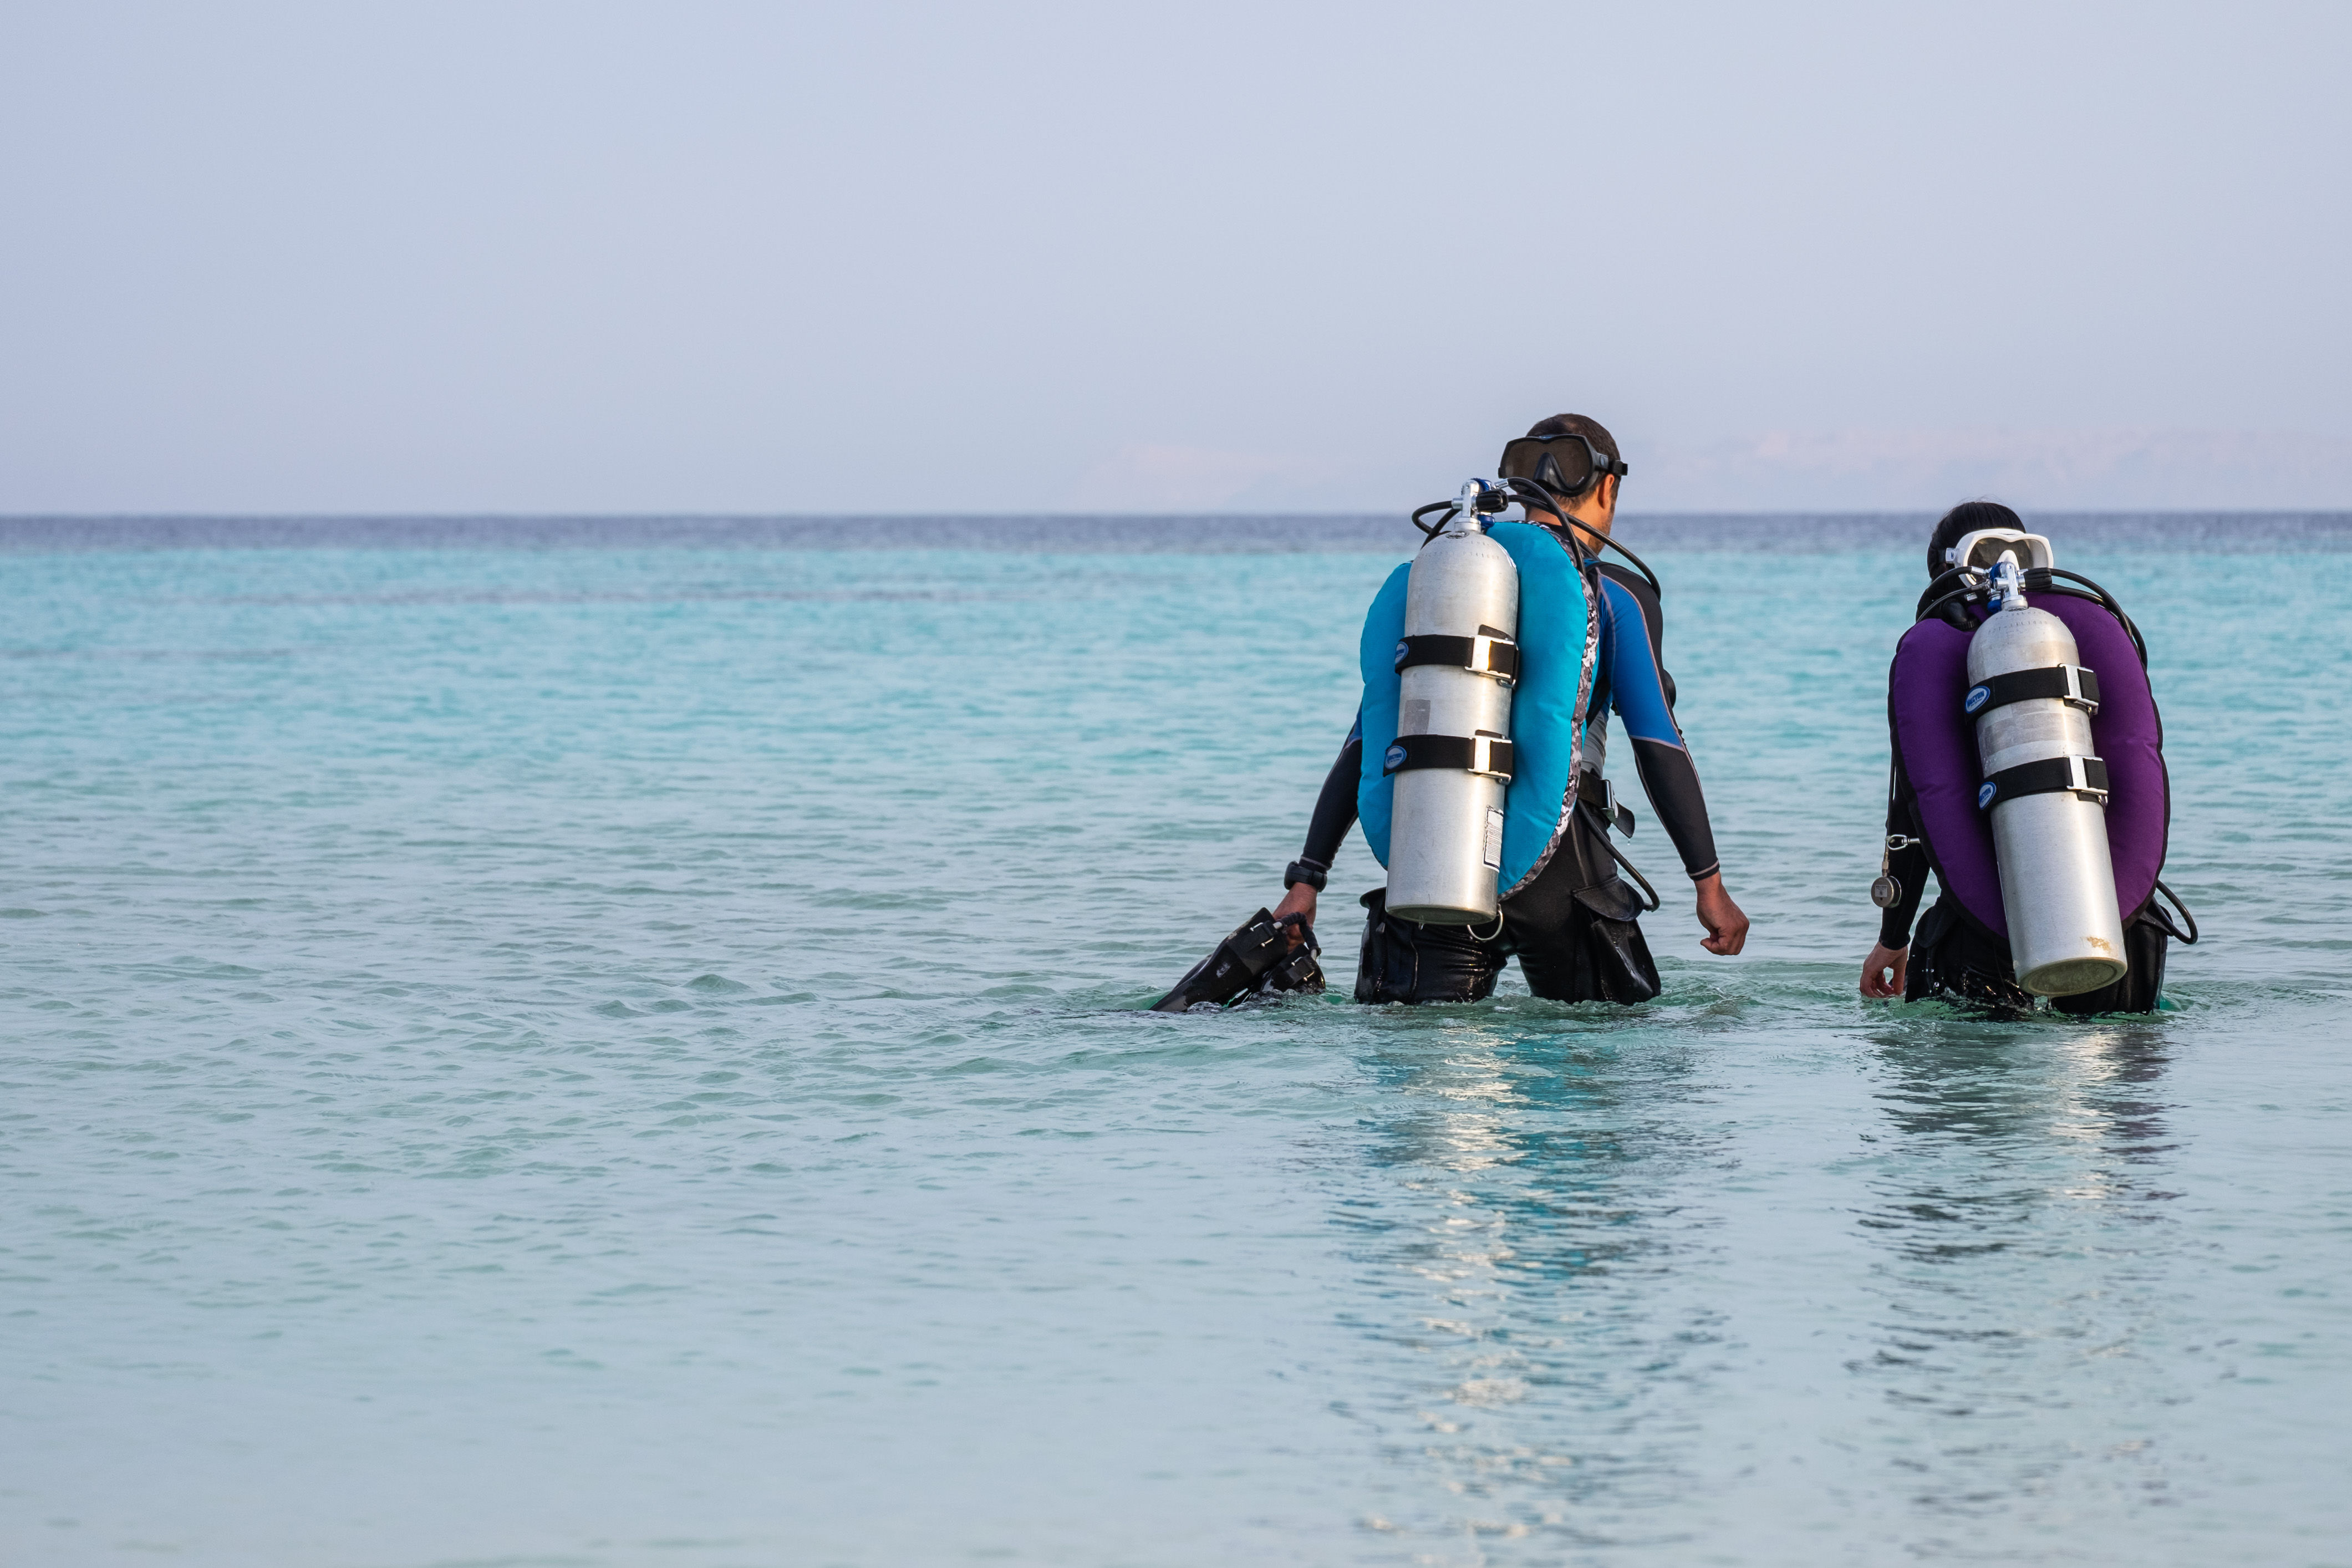 DIVING WITH CHILDREN – A GOOD IDEA, BUT…